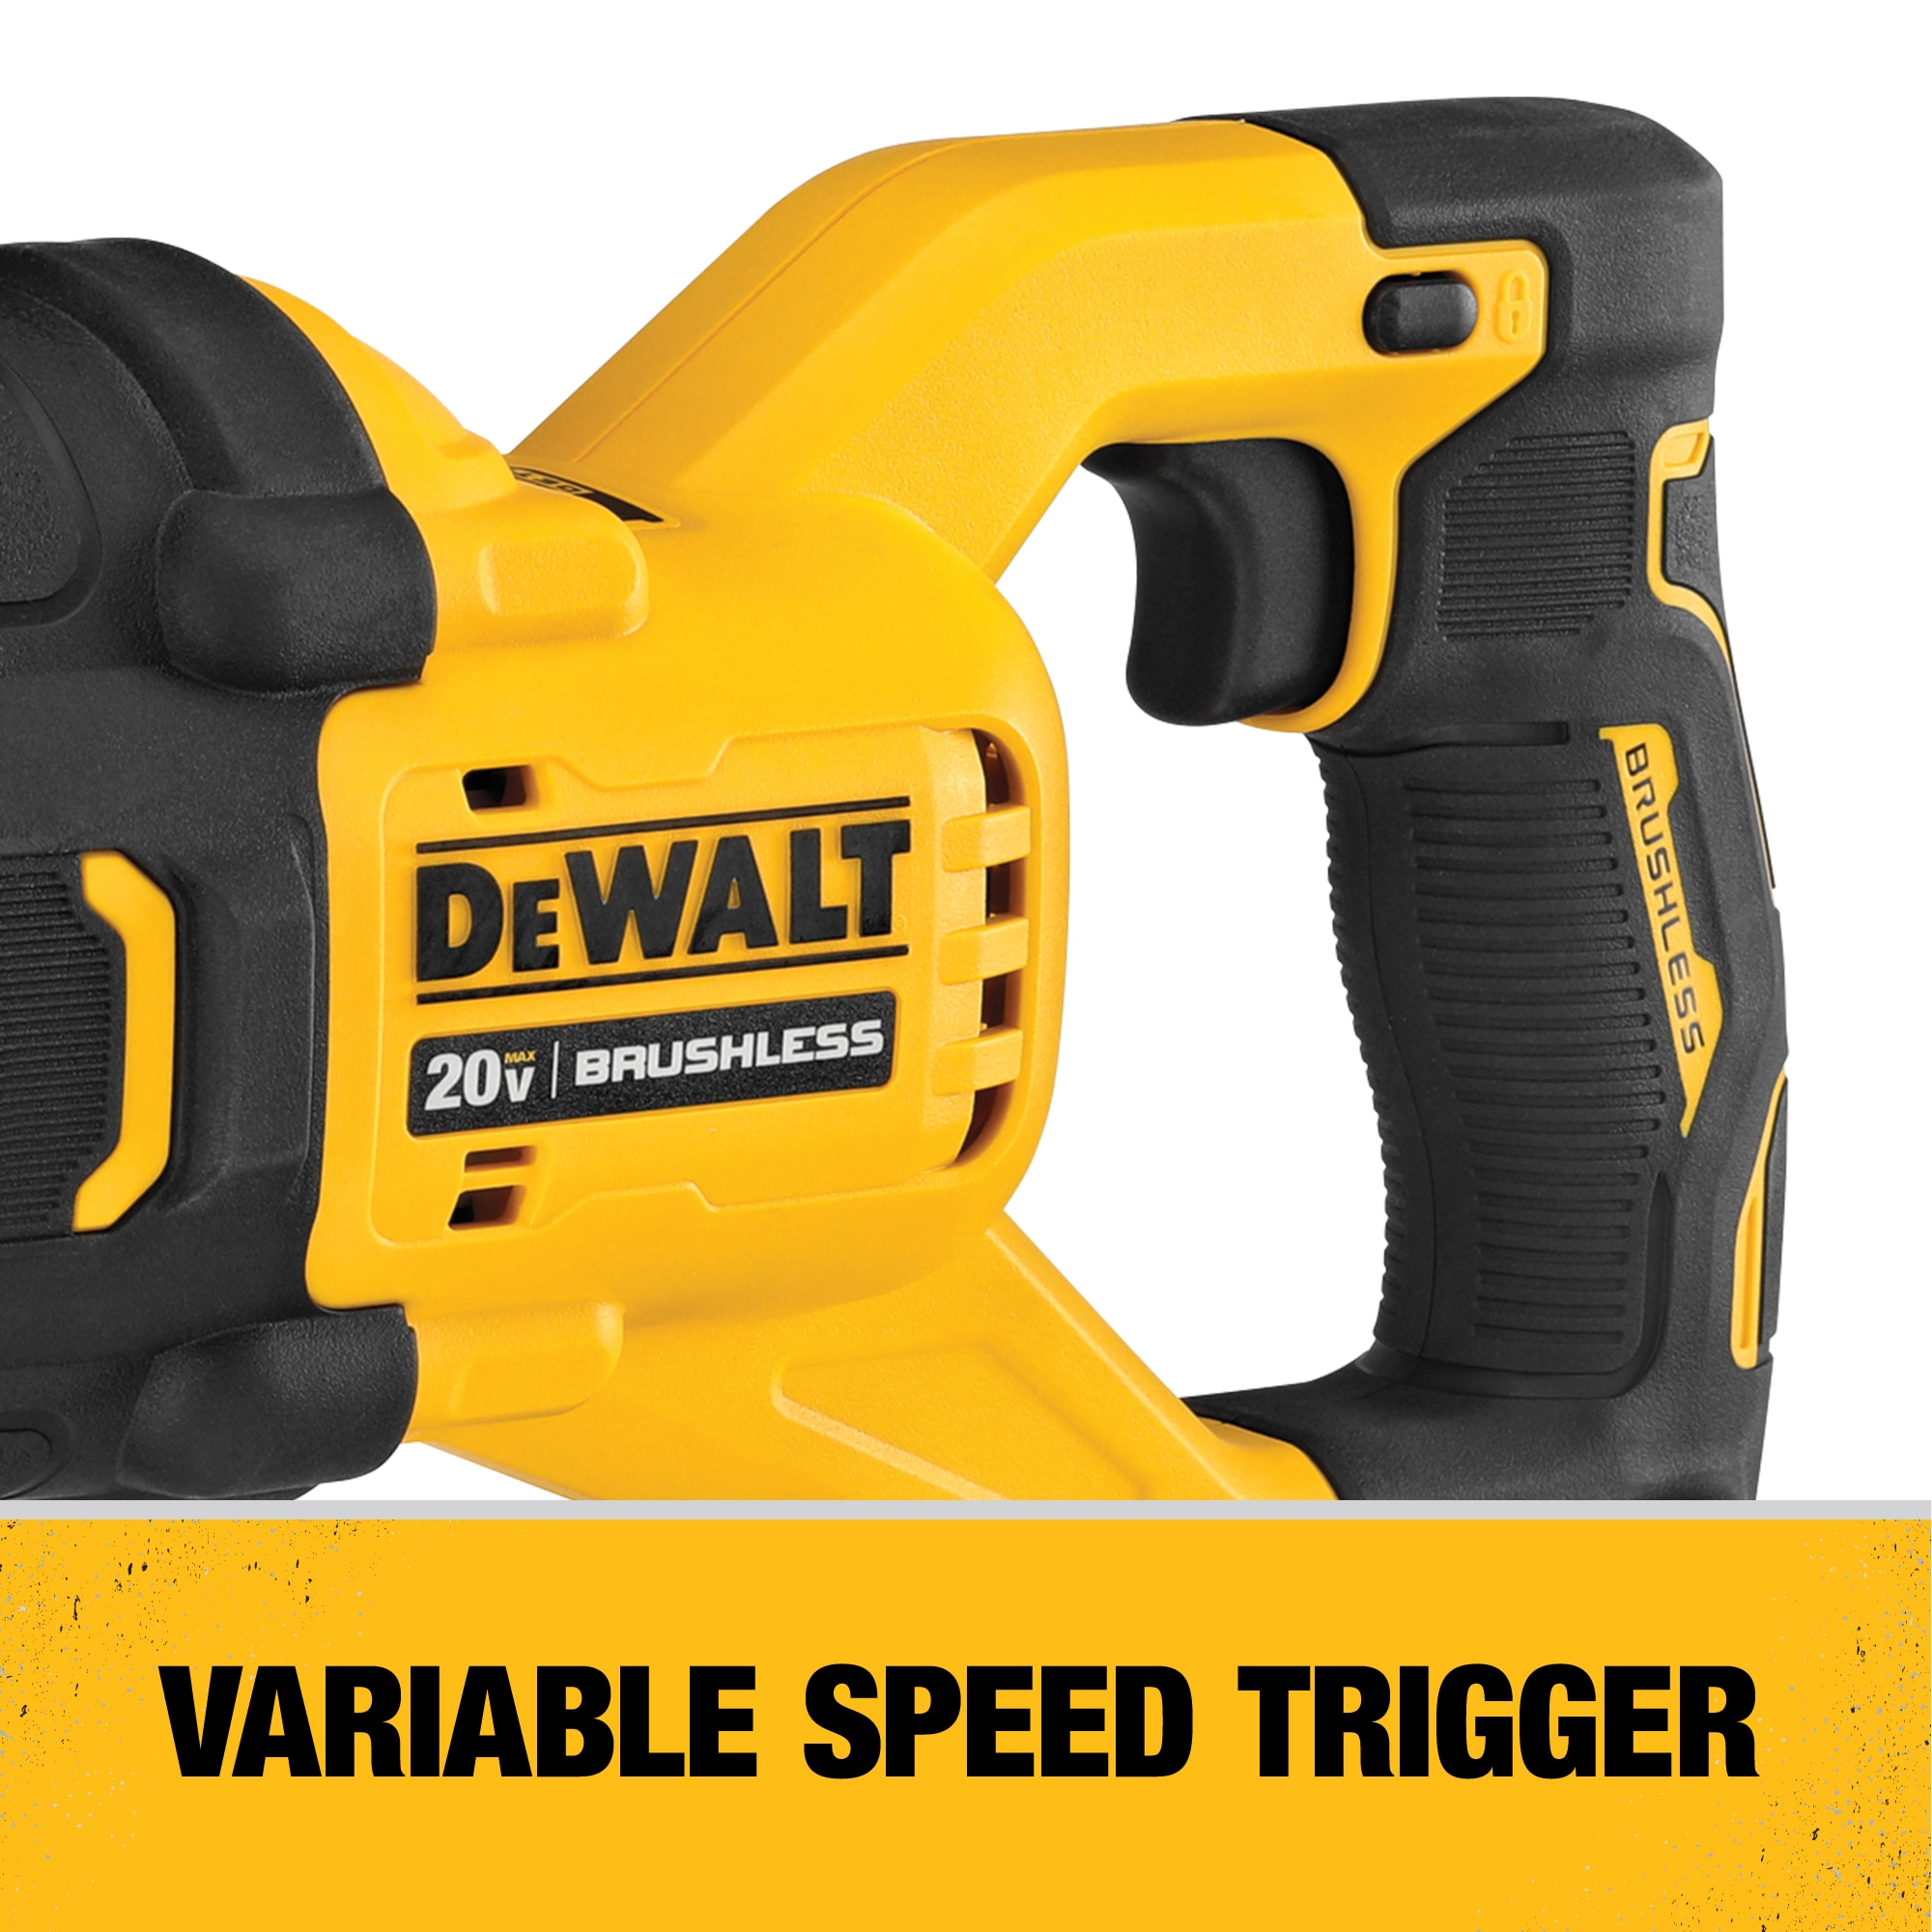 DEWALT XR POWER DETECT 20-volt Max Variable Speed Brushless Cordless  Reciprocating Saw (Bare Tool) in the Reciprocating Saws department at 